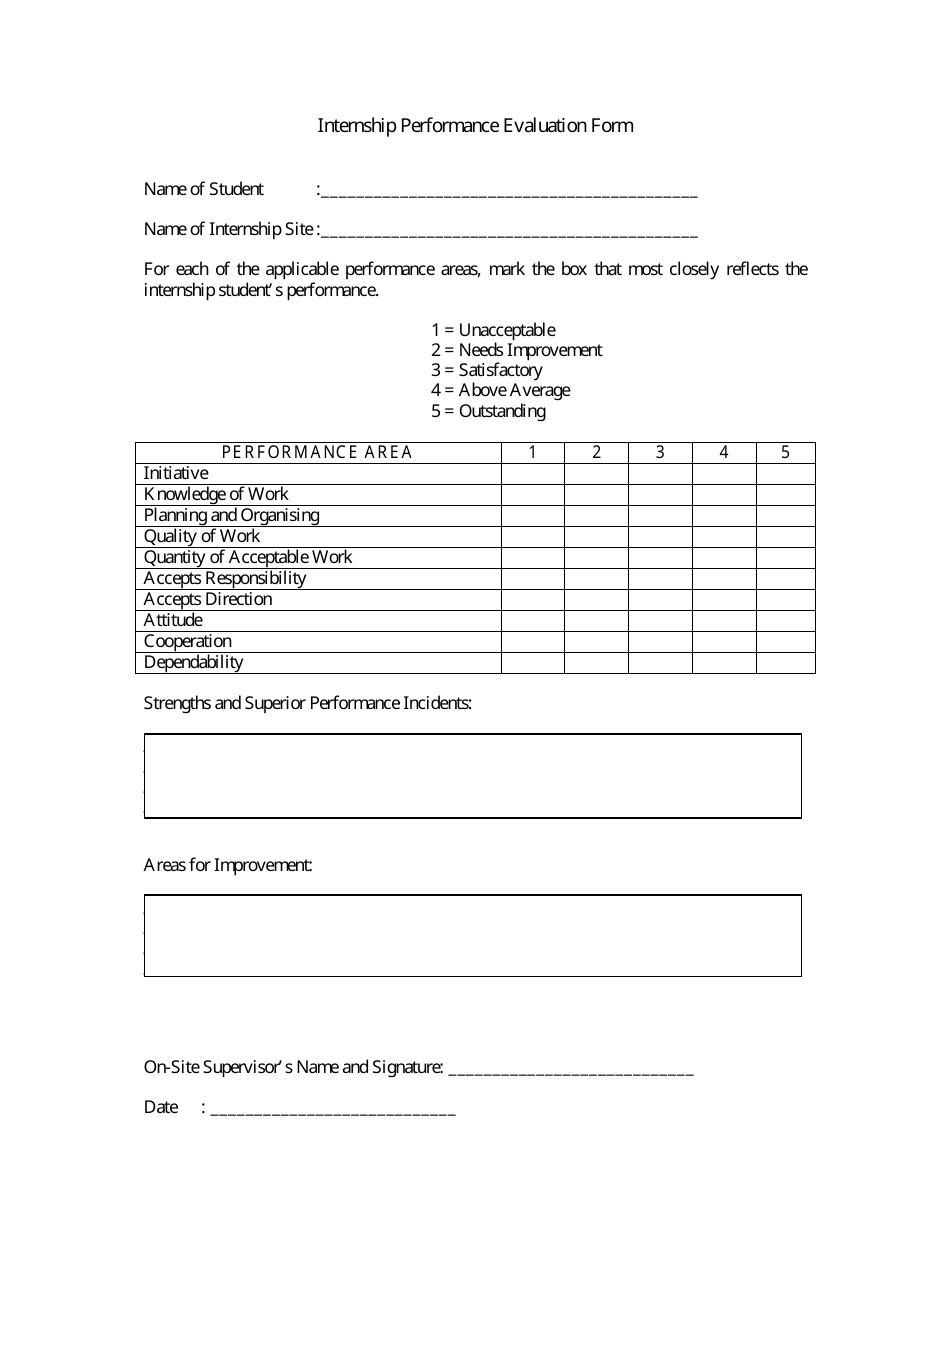 Internship Performance Evaluation Form Fill Out, Sign Online and